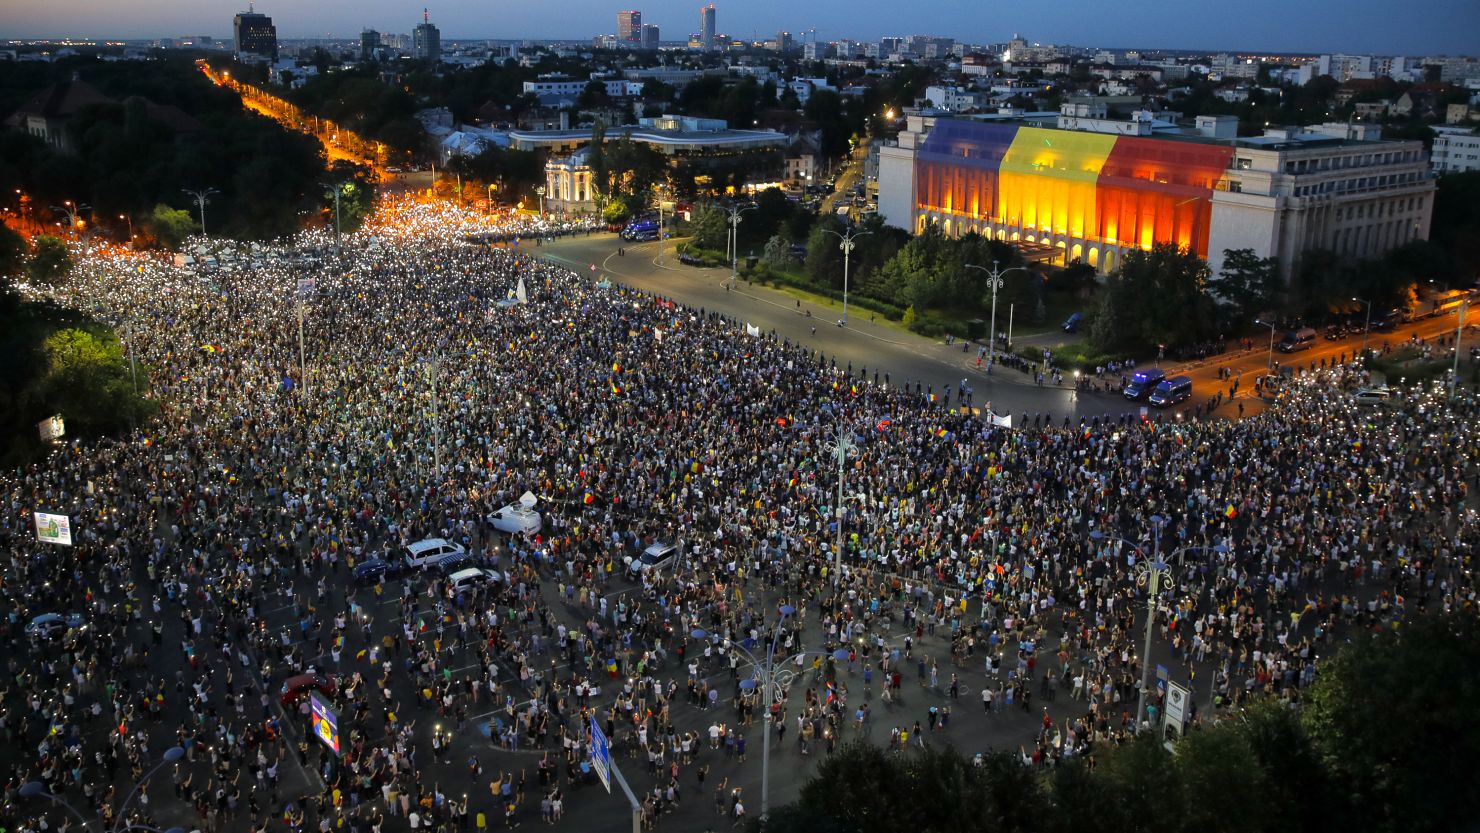 Romanians gathered in Bucharest Saturday night for a second day of protests.